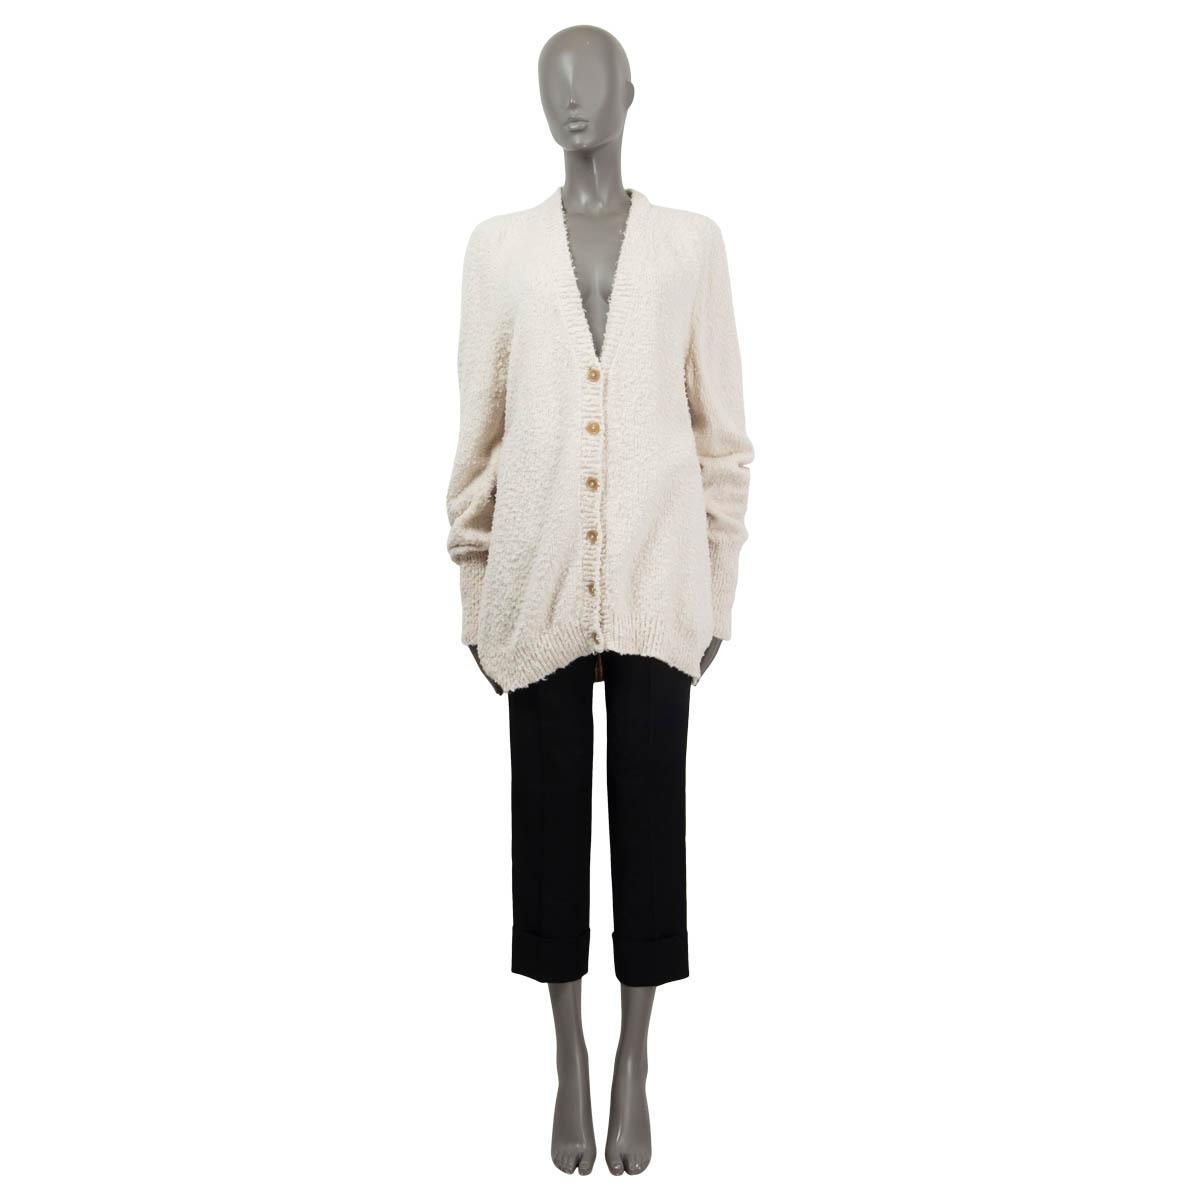 100% authentic Maison Margiela oversized knit cardigan in off-white cotton (86%) and polyamide (14%). Opens with buttons on the front. Unlined. Has been worn and is in excellent condition.

Measurements
Tag Size	XS
Size	XS
Shoulder Width	41cm